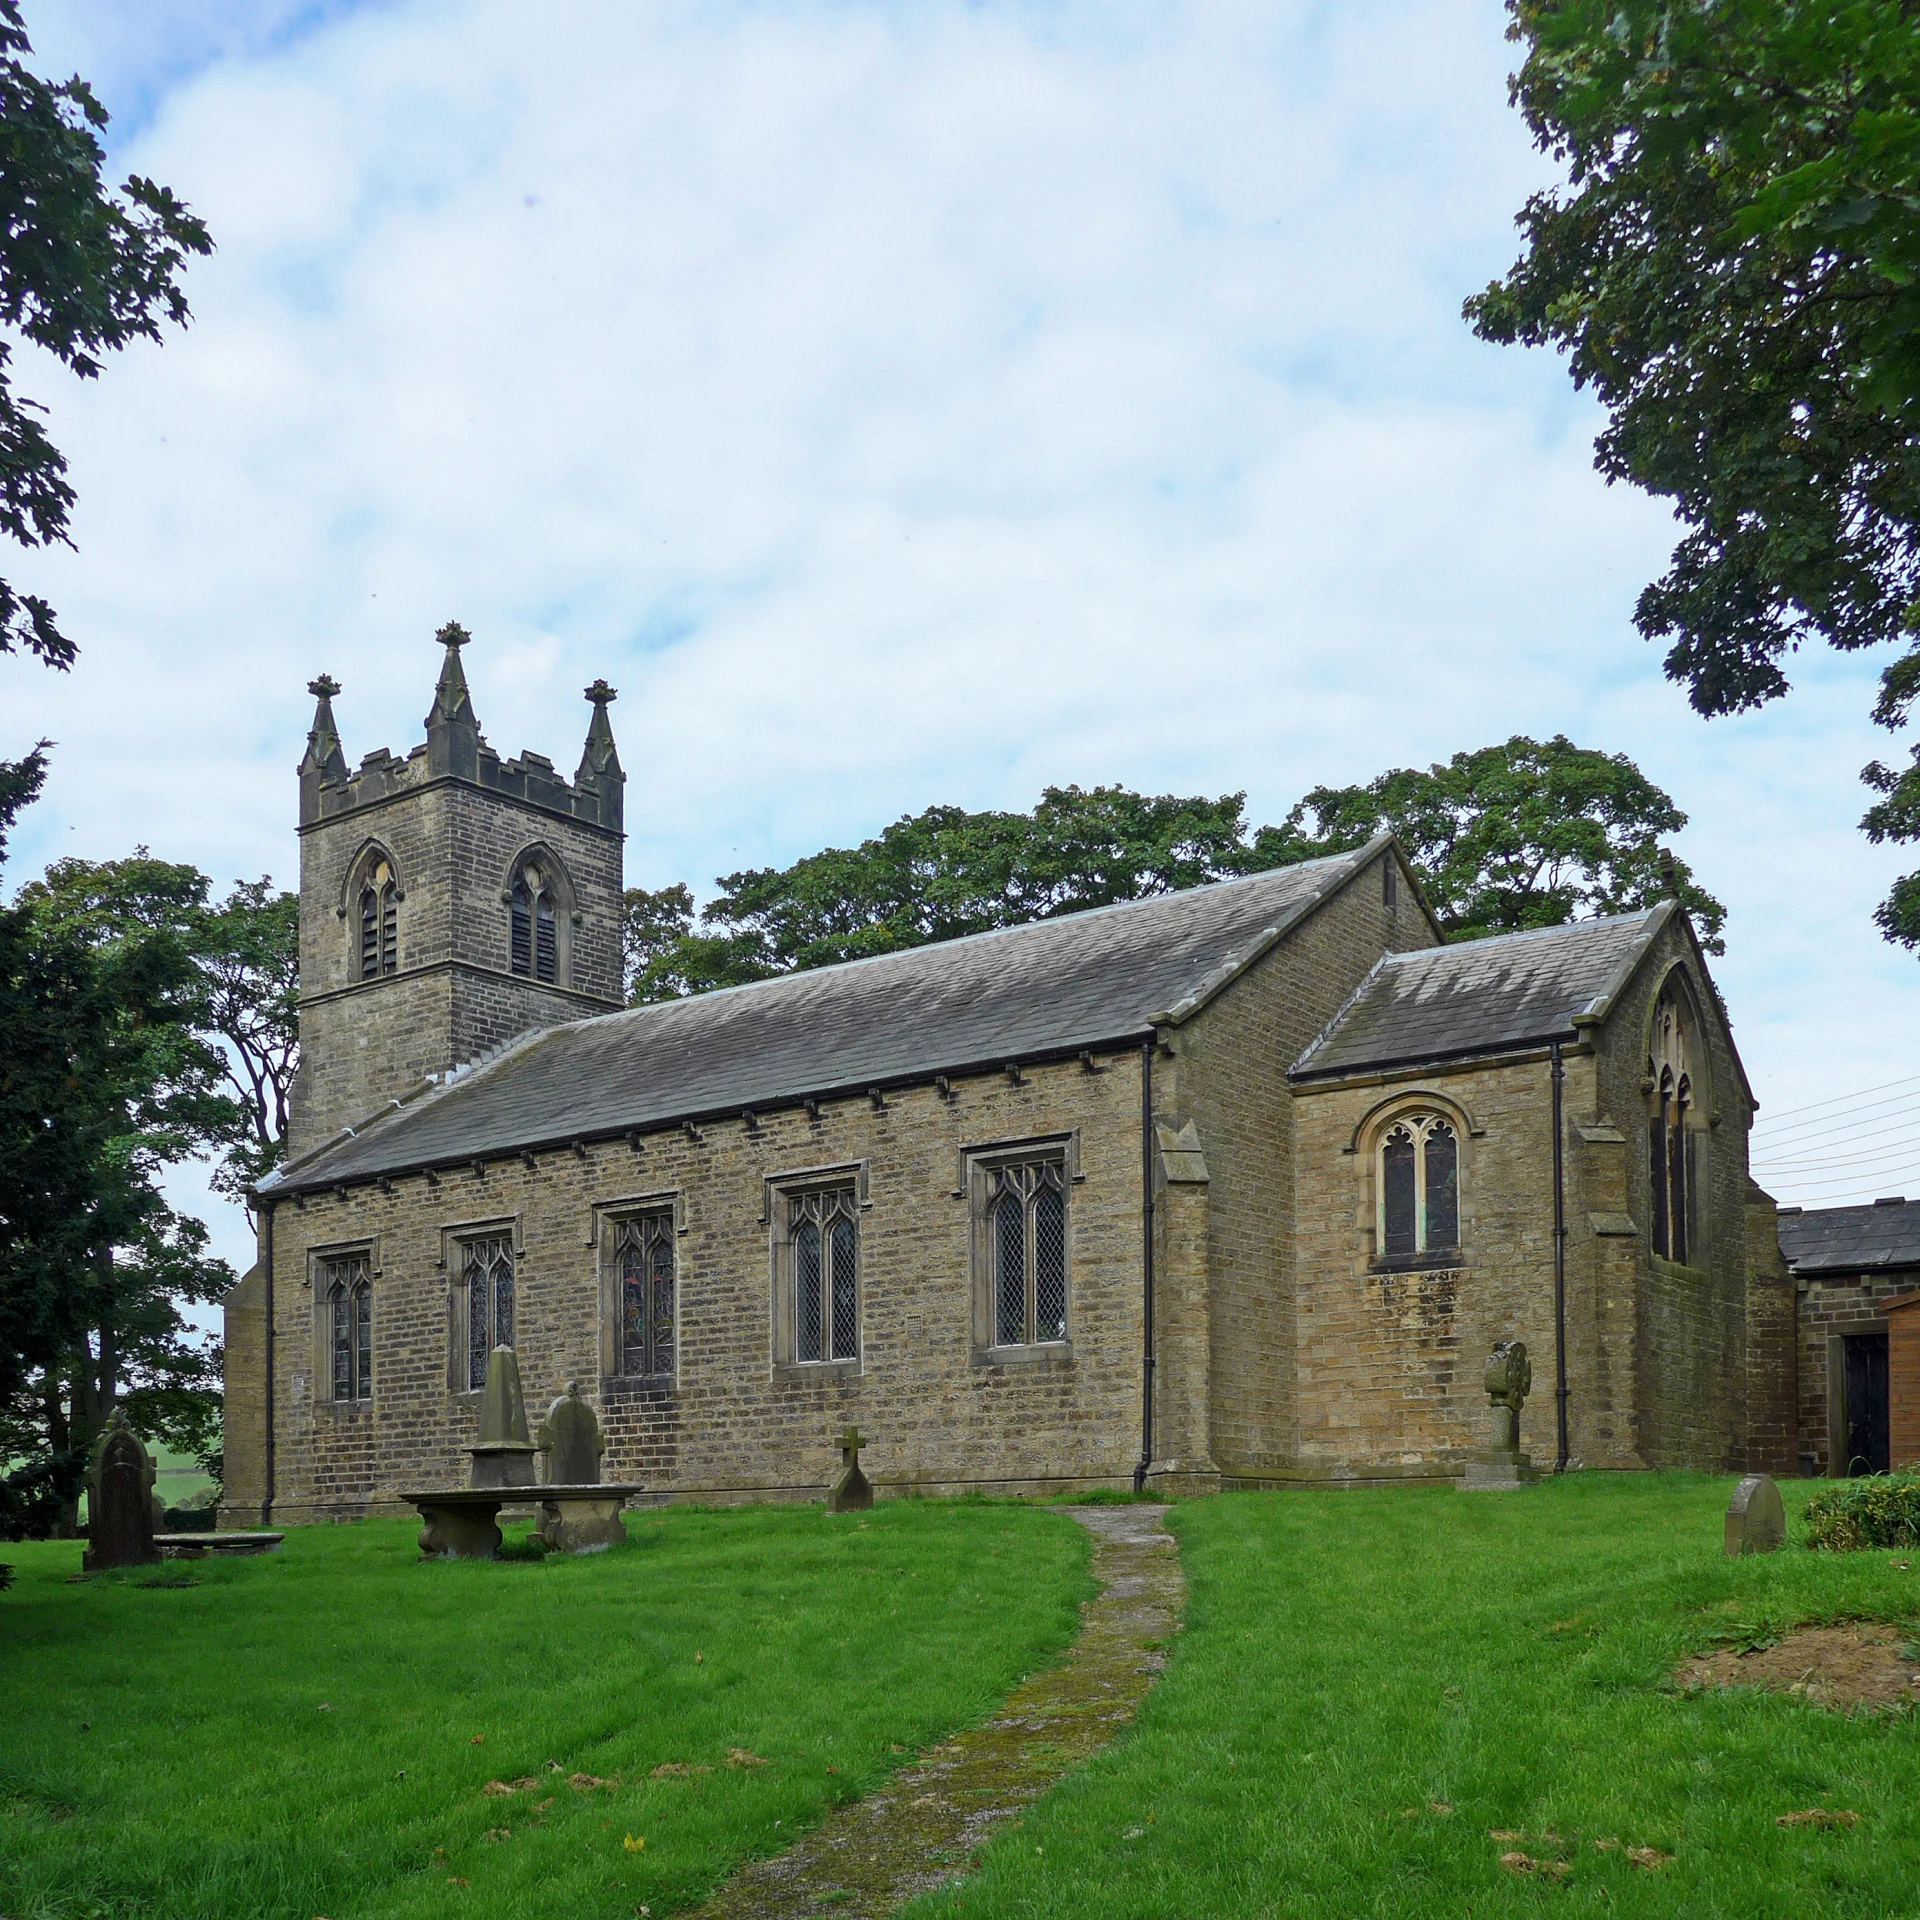 a po of a brick church building, with some grass and trees